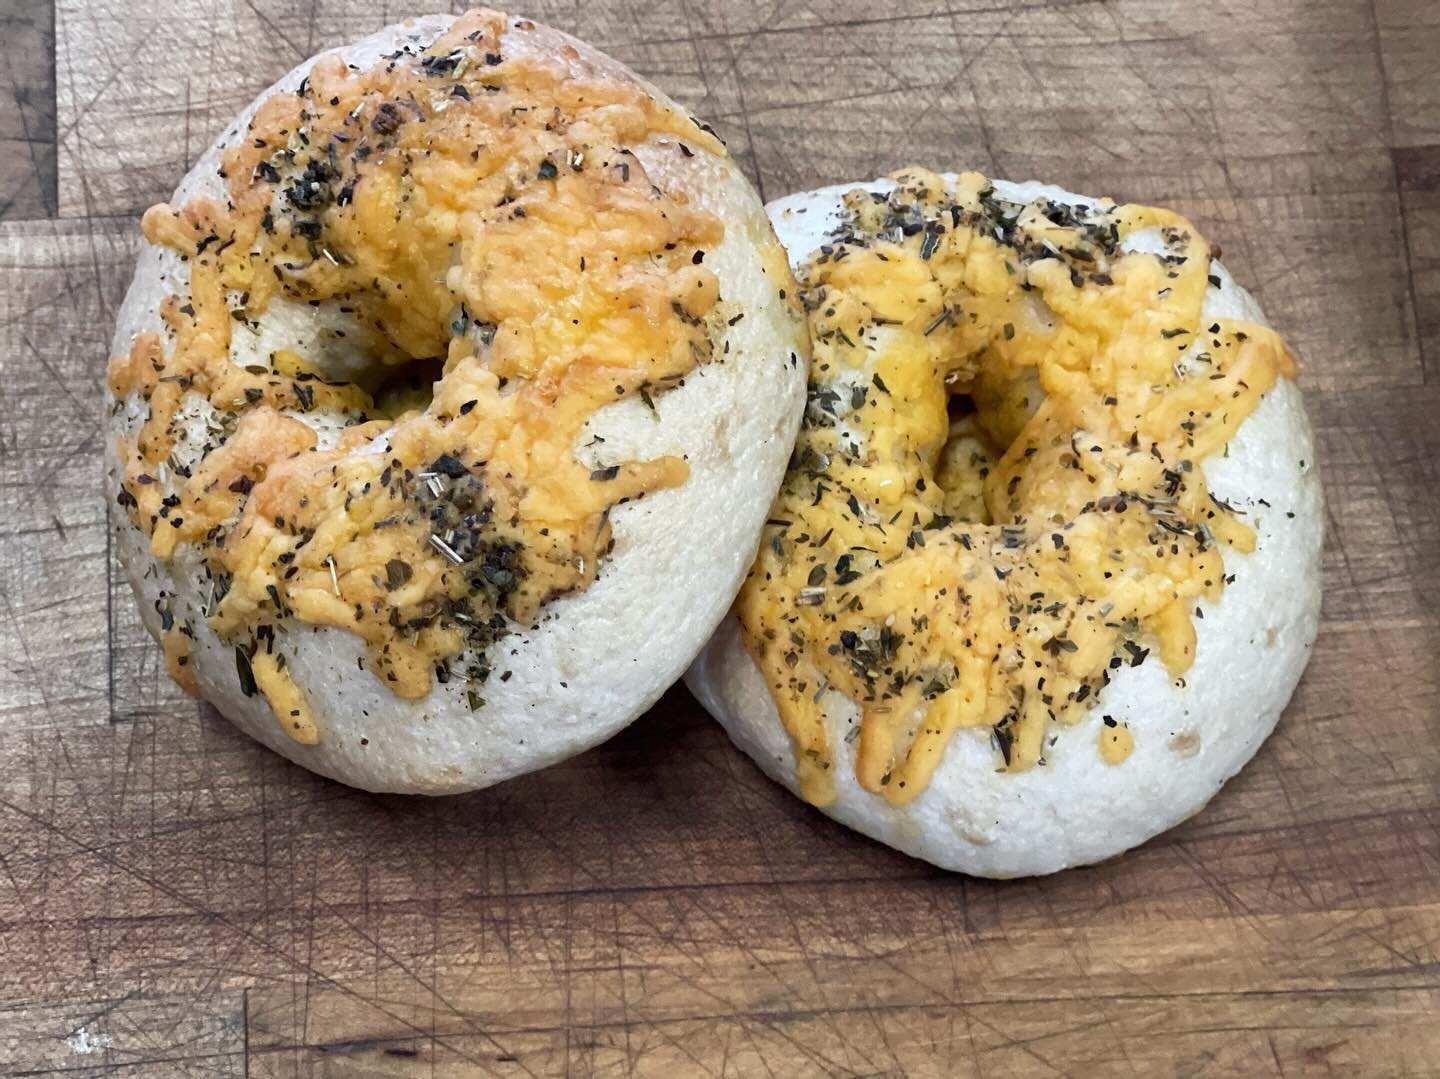 Got some new bagels in from @vanderwaal_homestead: Italian Herb and Cheese! 

They smell so good. 

Come grab em today till 9pm or Saturday from 10am-9pm!